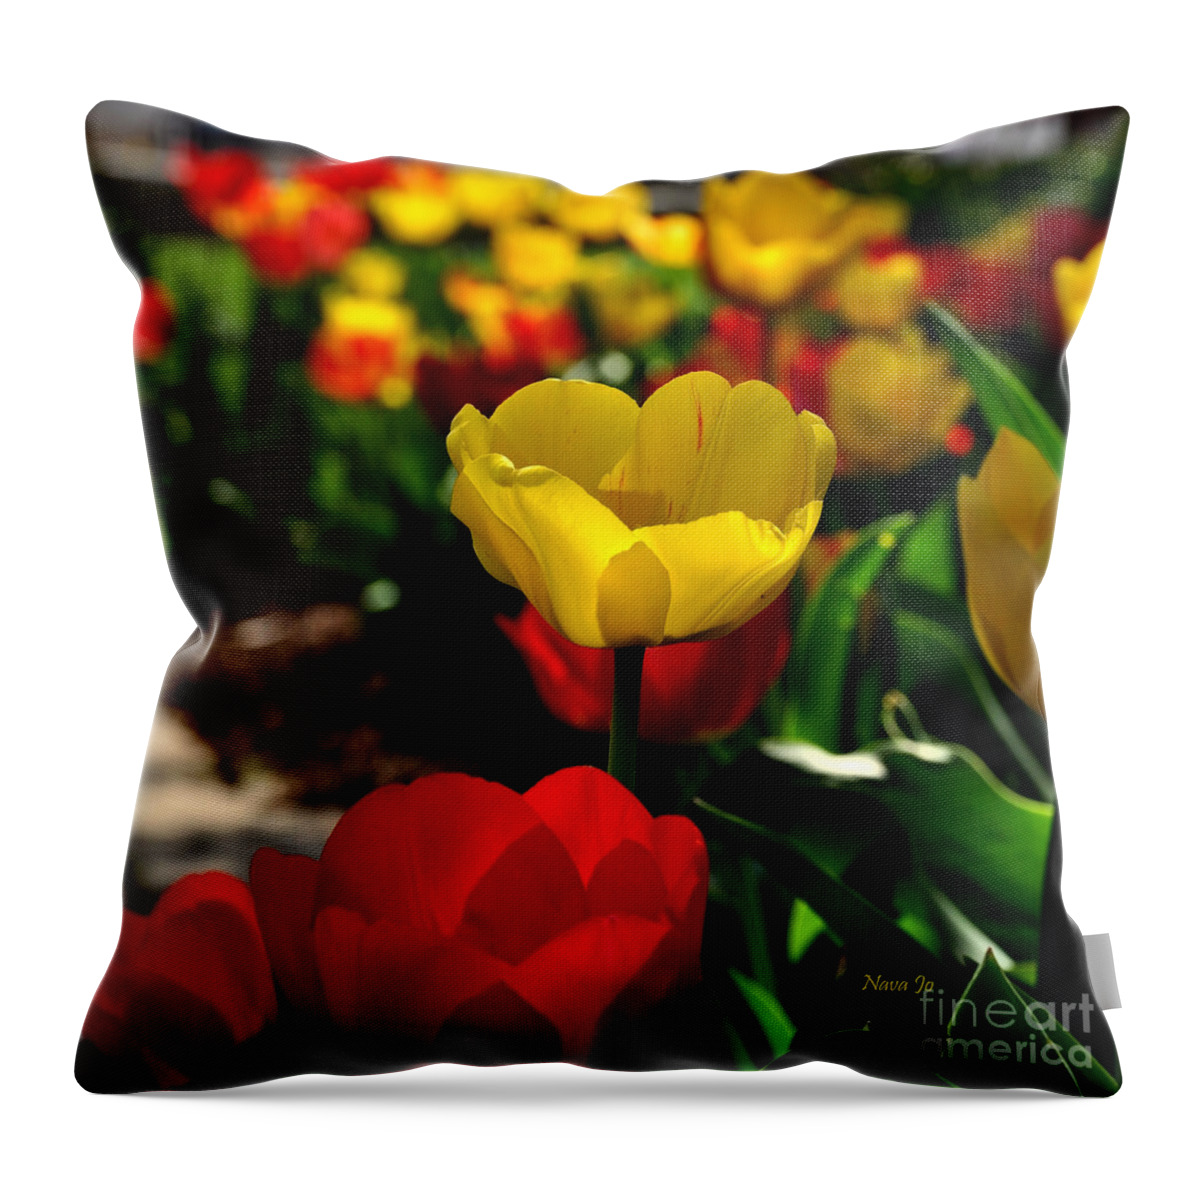 Floral Throw Pillow featuring the photograph Colorful Spring Tulips by Nava Thompson